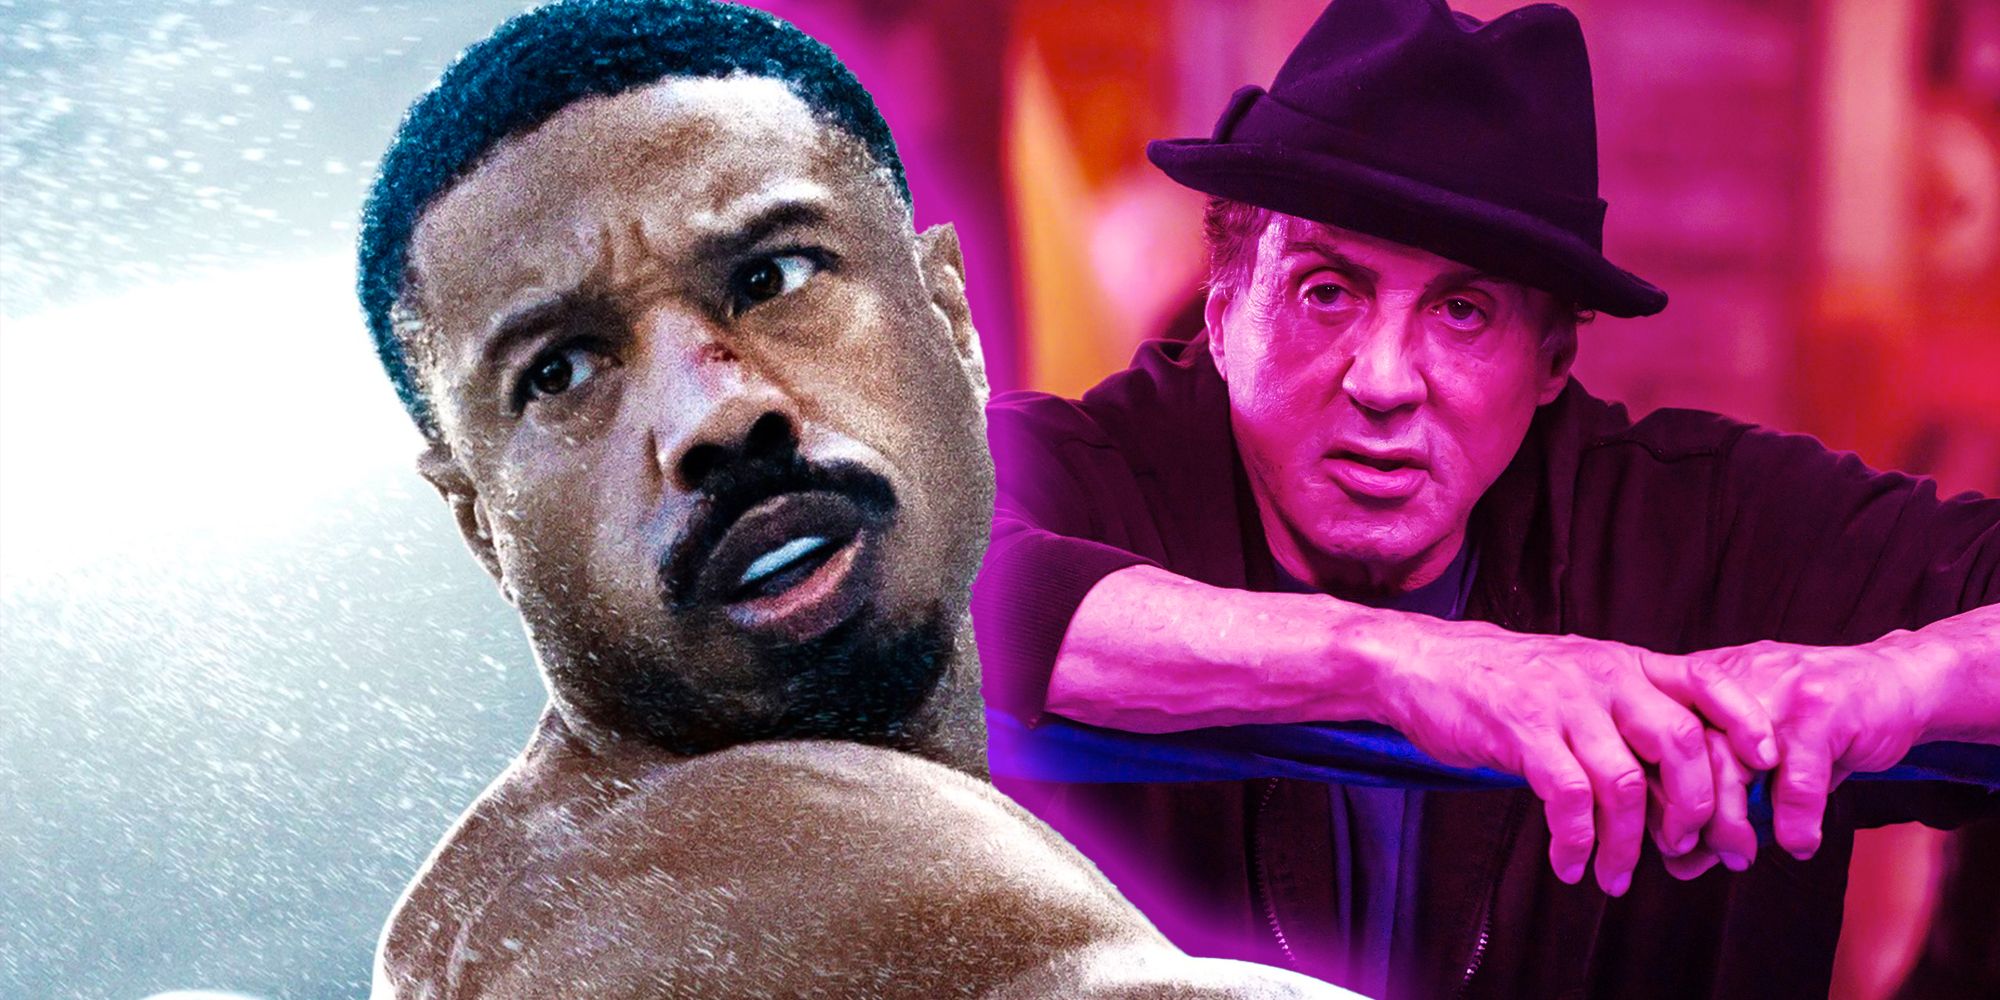 Michael B. Jordan in Creed 3 and Sylvester Stallone in Creed 2